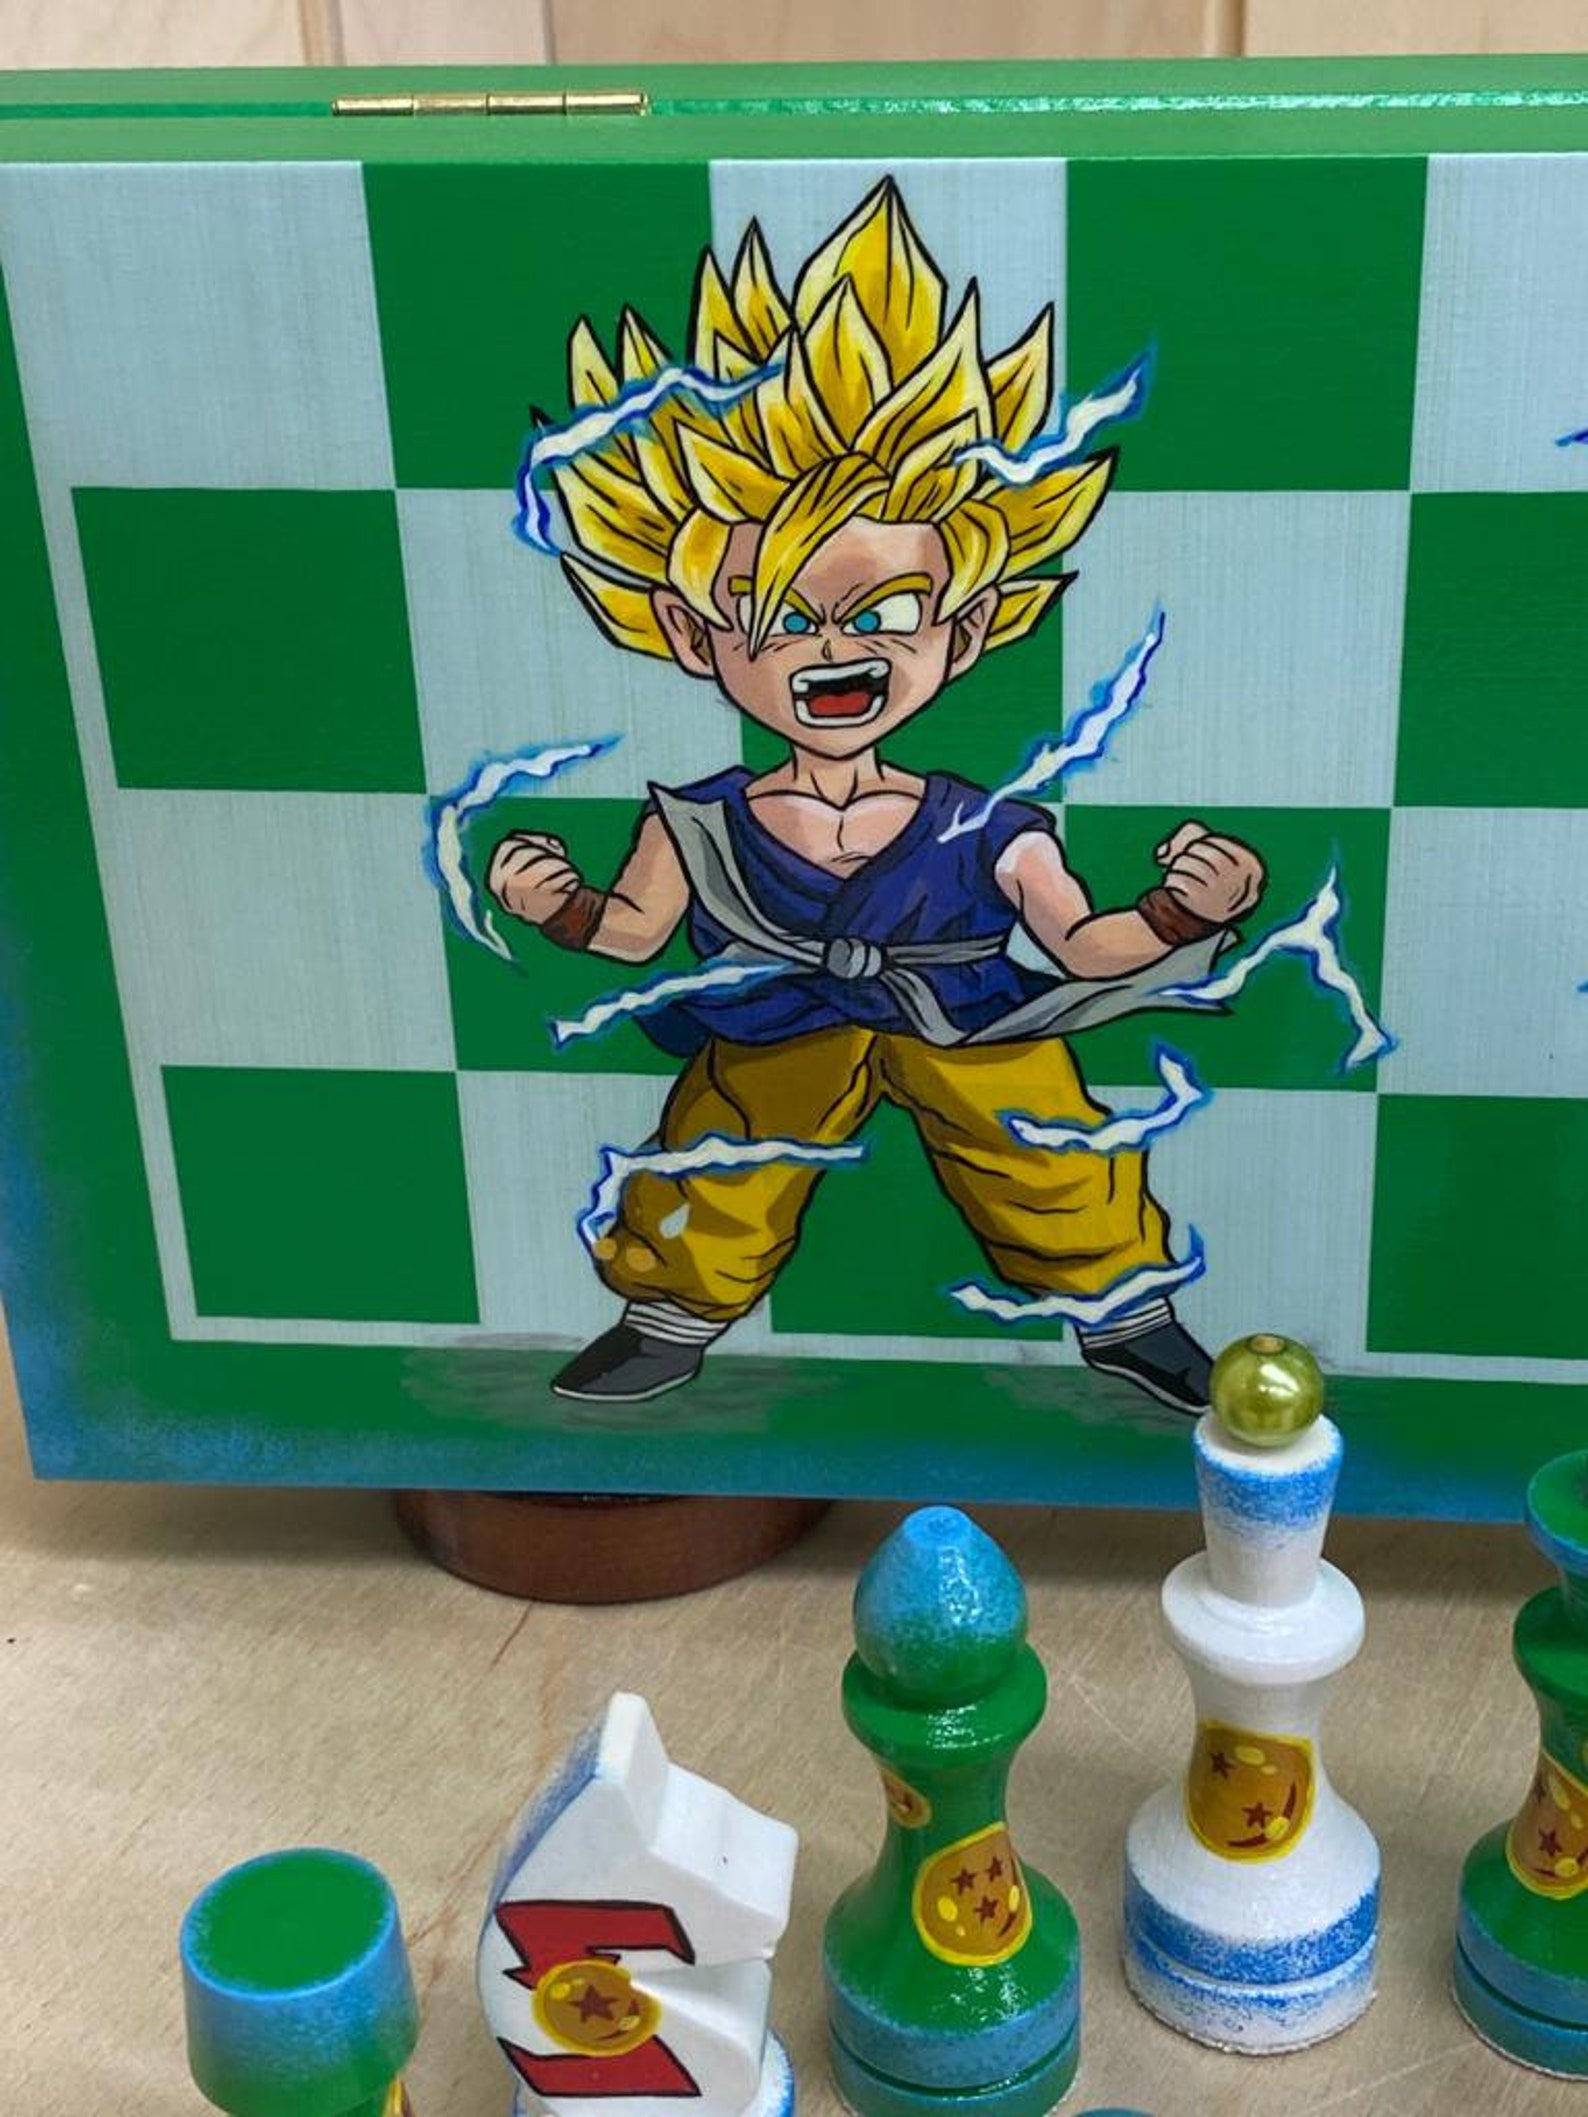 Anime Art. A Custom Made Wooden Hand Painted Chess Set. | Etsy